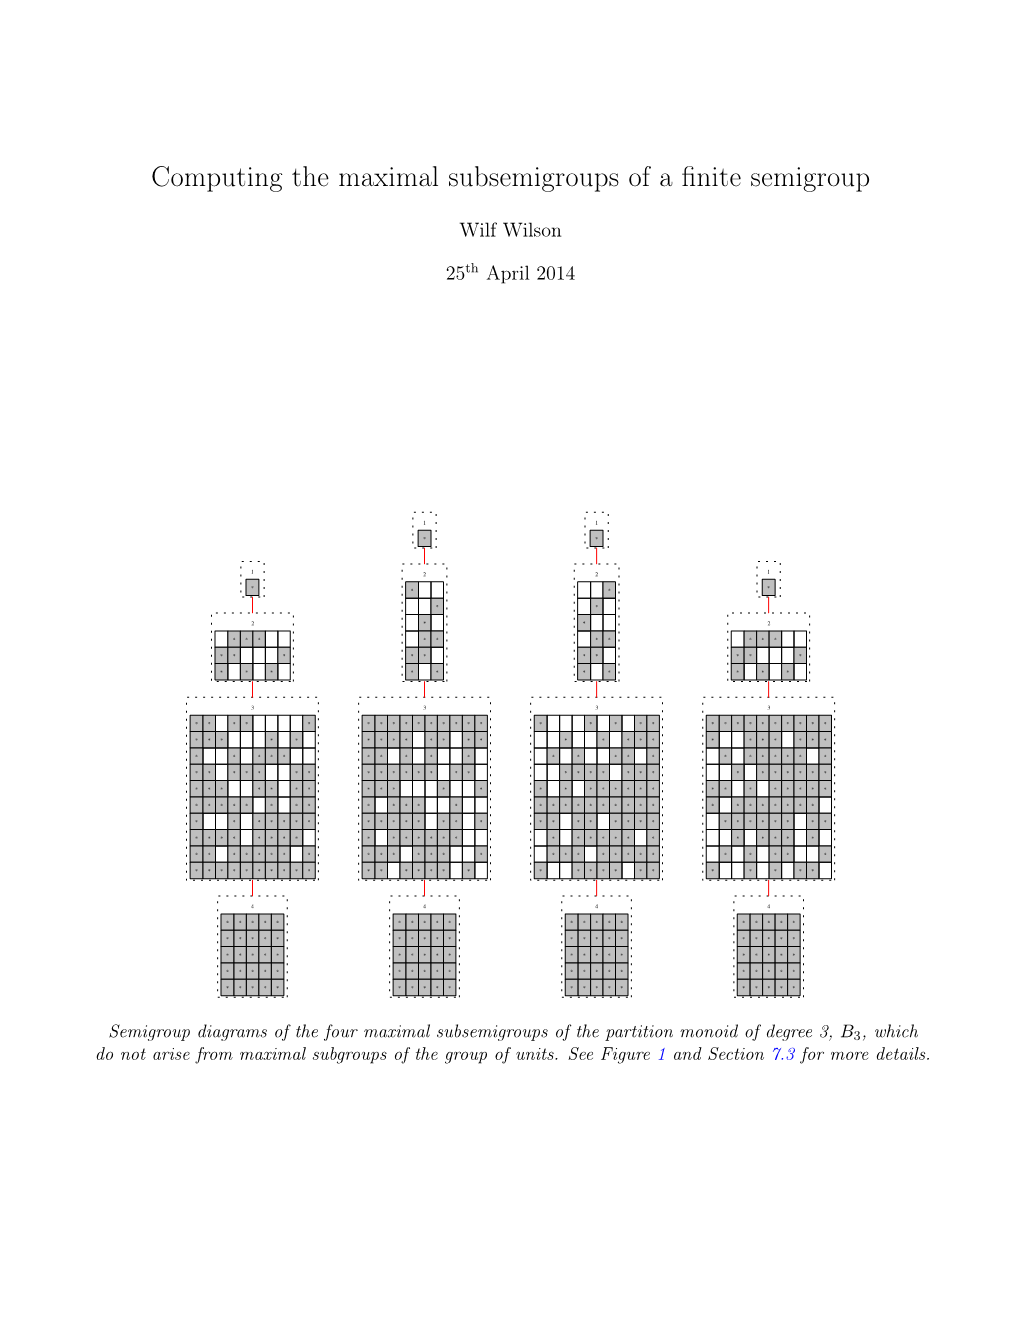 Computing the Maximal Subsemigroups of a Finite Semigroup